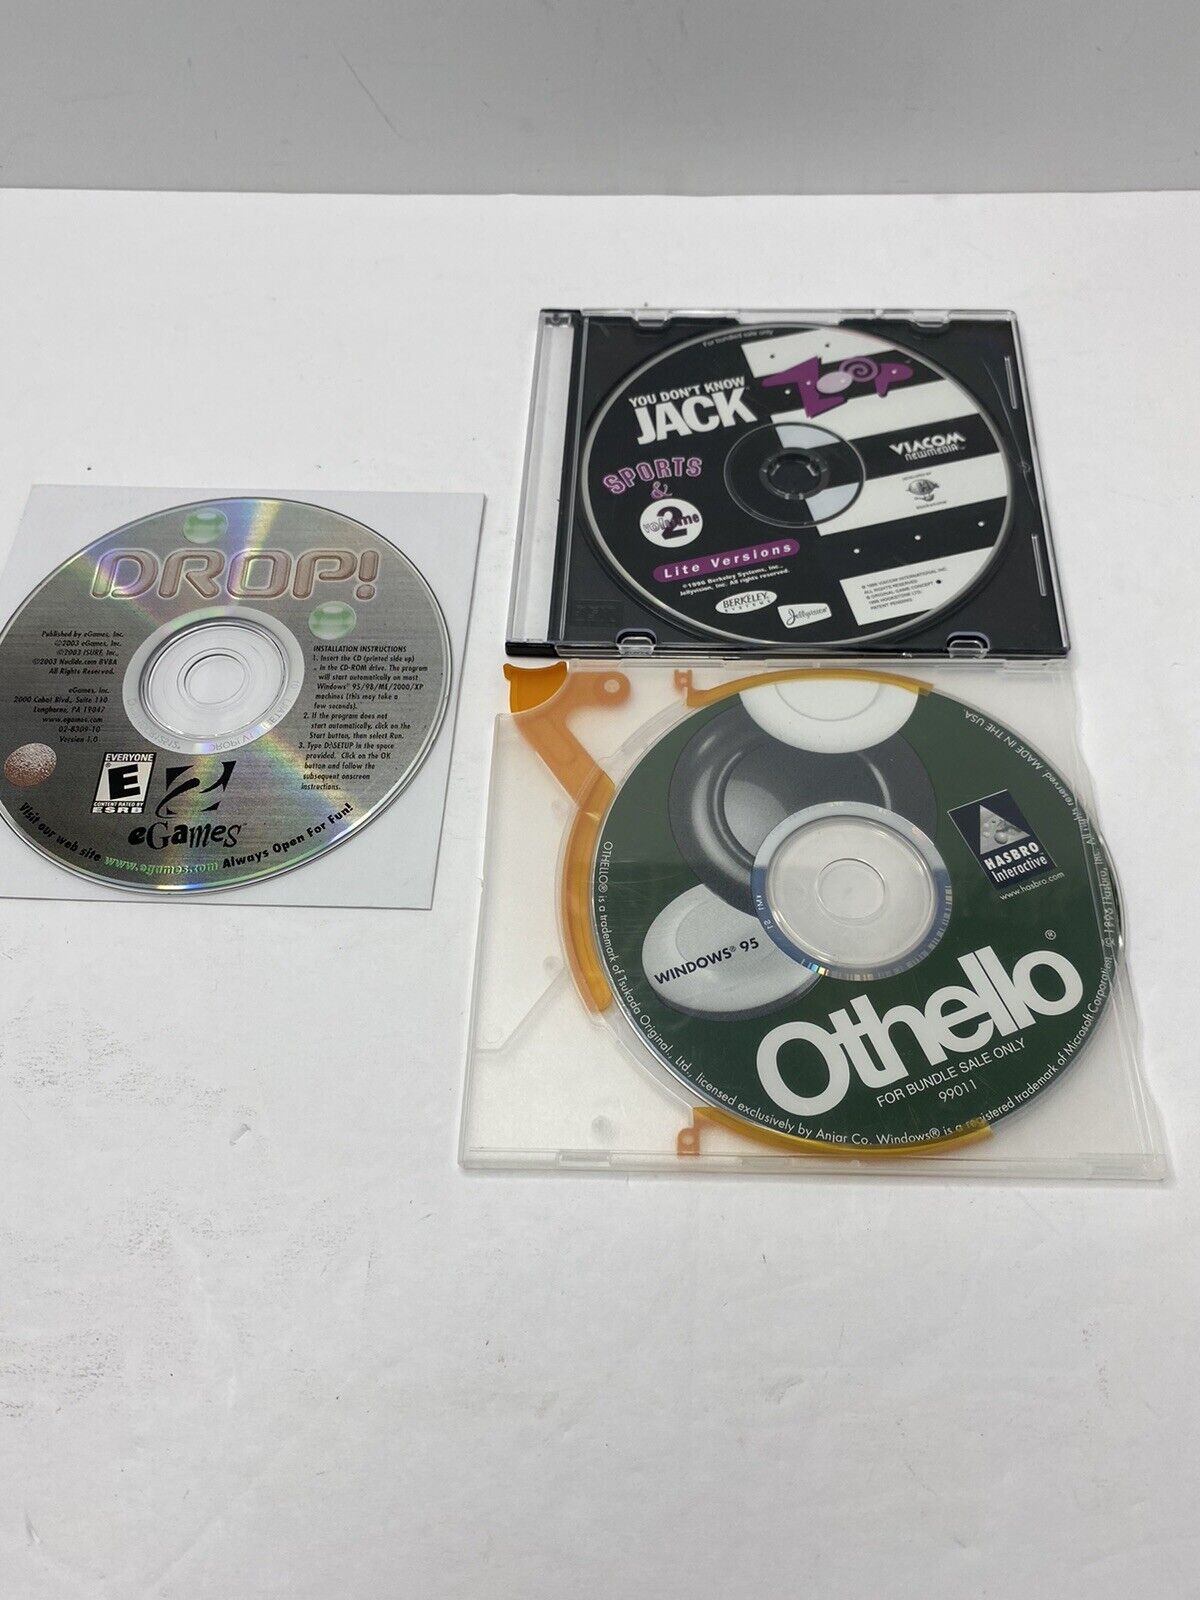 Othello PC CD strategy computer board game - DROP - You Don’t Know Jack Sports 2